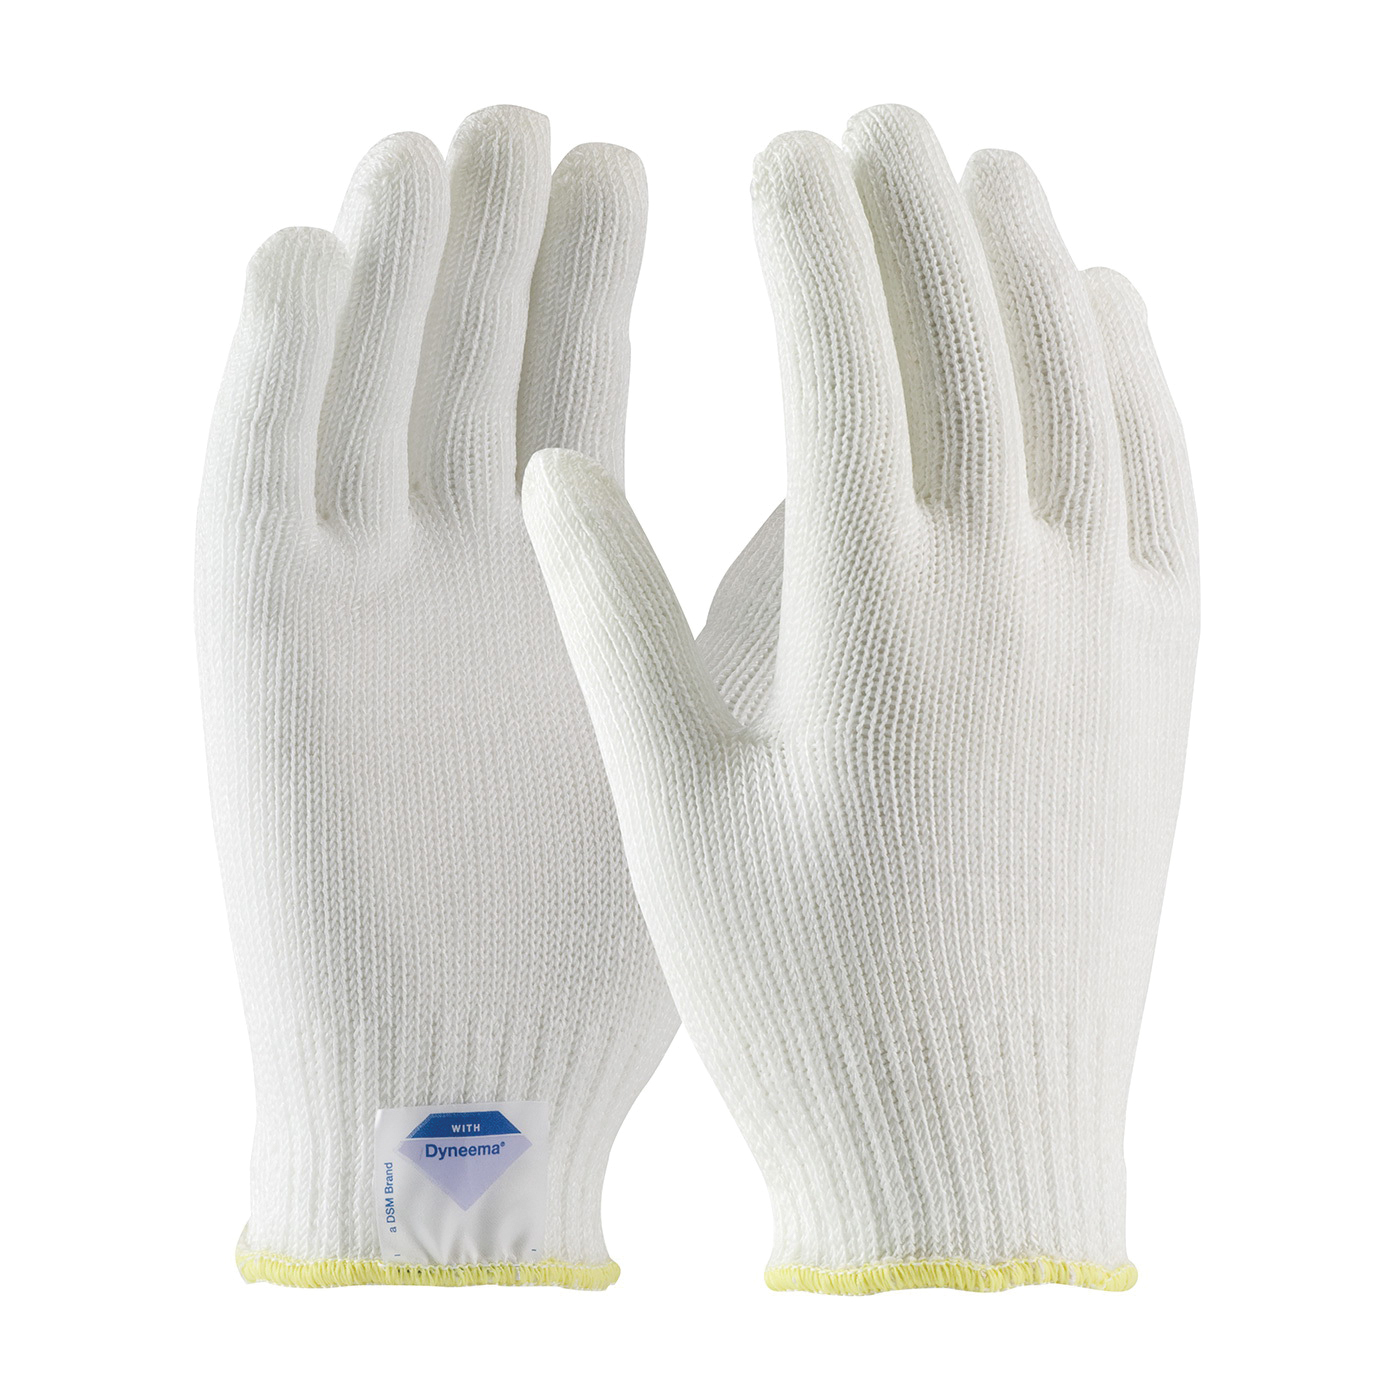 PIP® Kut-Gard® 17-DL300 Medium Weight Unisex Cut Resistant Gloves, Dyneema®ycra®, Continuous Knit Wrist Cuff, Resists: Cut, ANSI Cut-Resistance Level: A3, Paired Hand